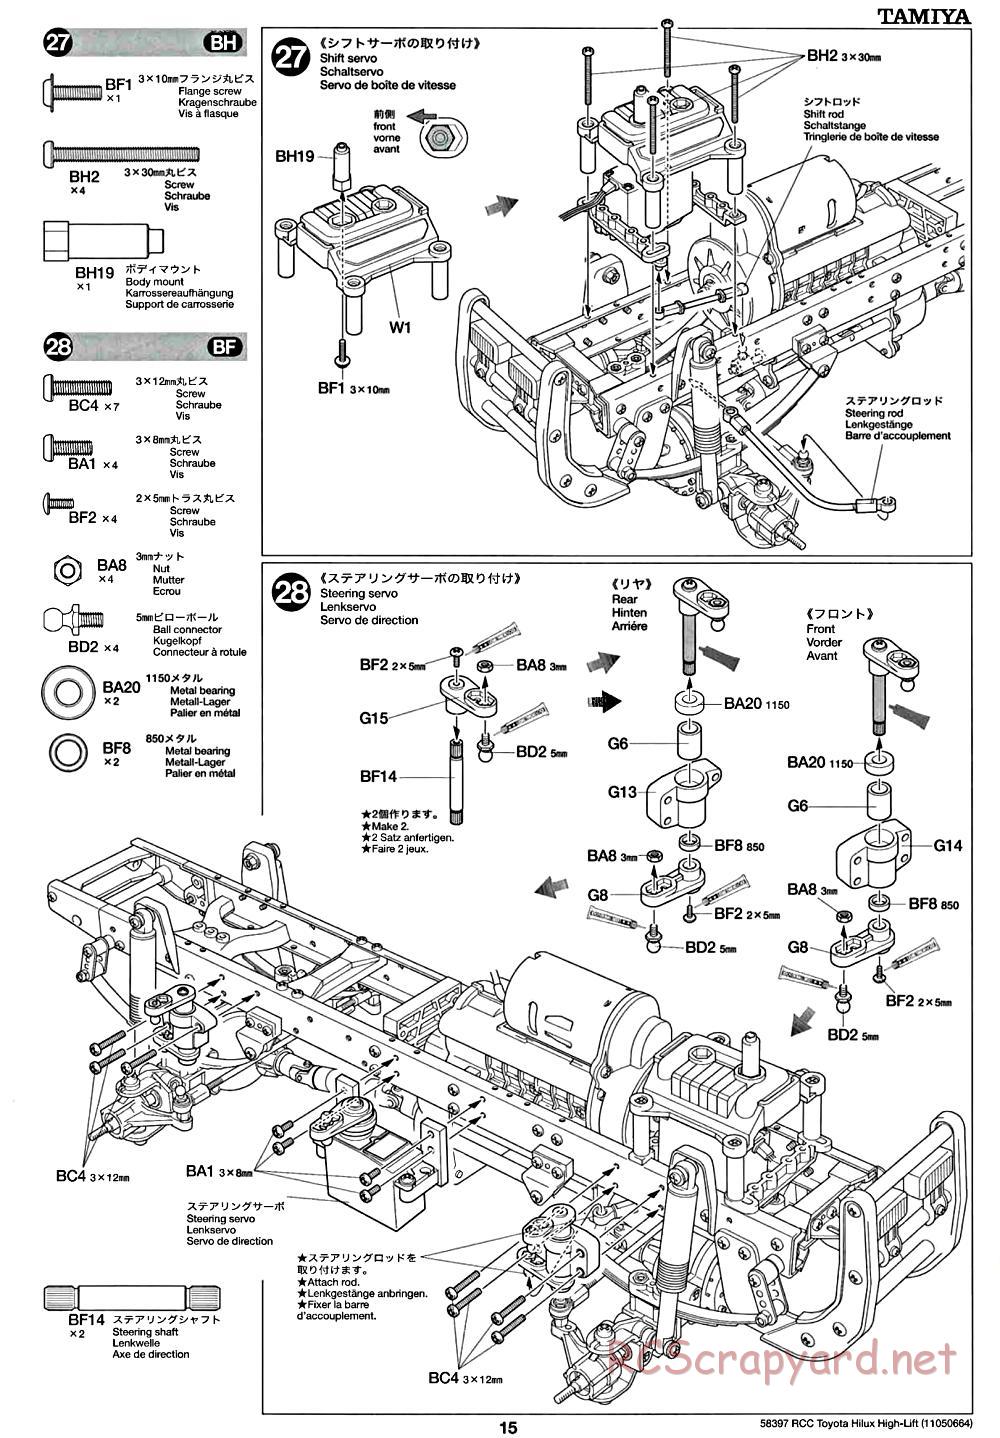 Tamiya - Toyota Hilux High-Lift Chassis - Manual - Page 15